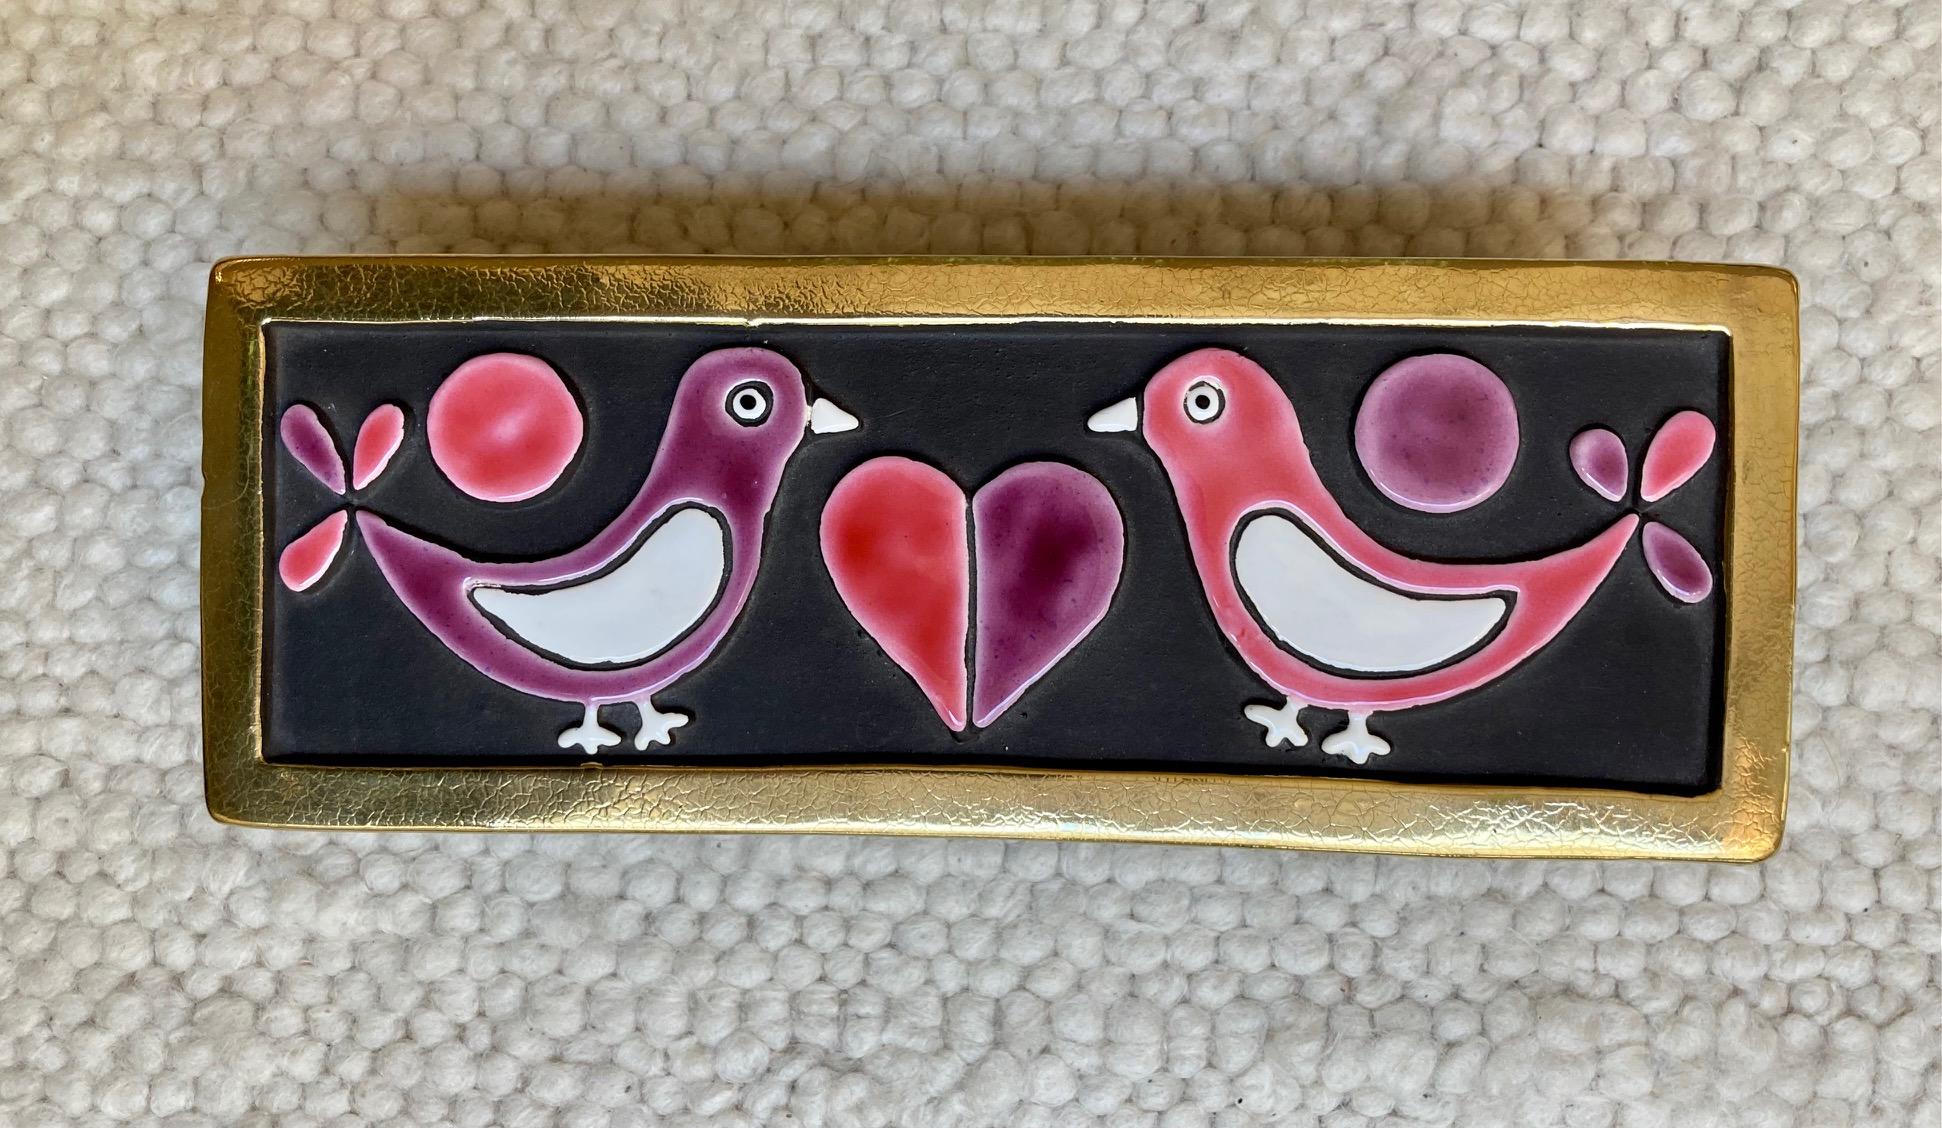 An enameled ceramic box sporting 2 doves facing each other and a heart in the middle.
Embossed earthenware enameled in pink, purple and white on a black background. 
Crackled gold edges. 
the base of the box is in wood
Model 